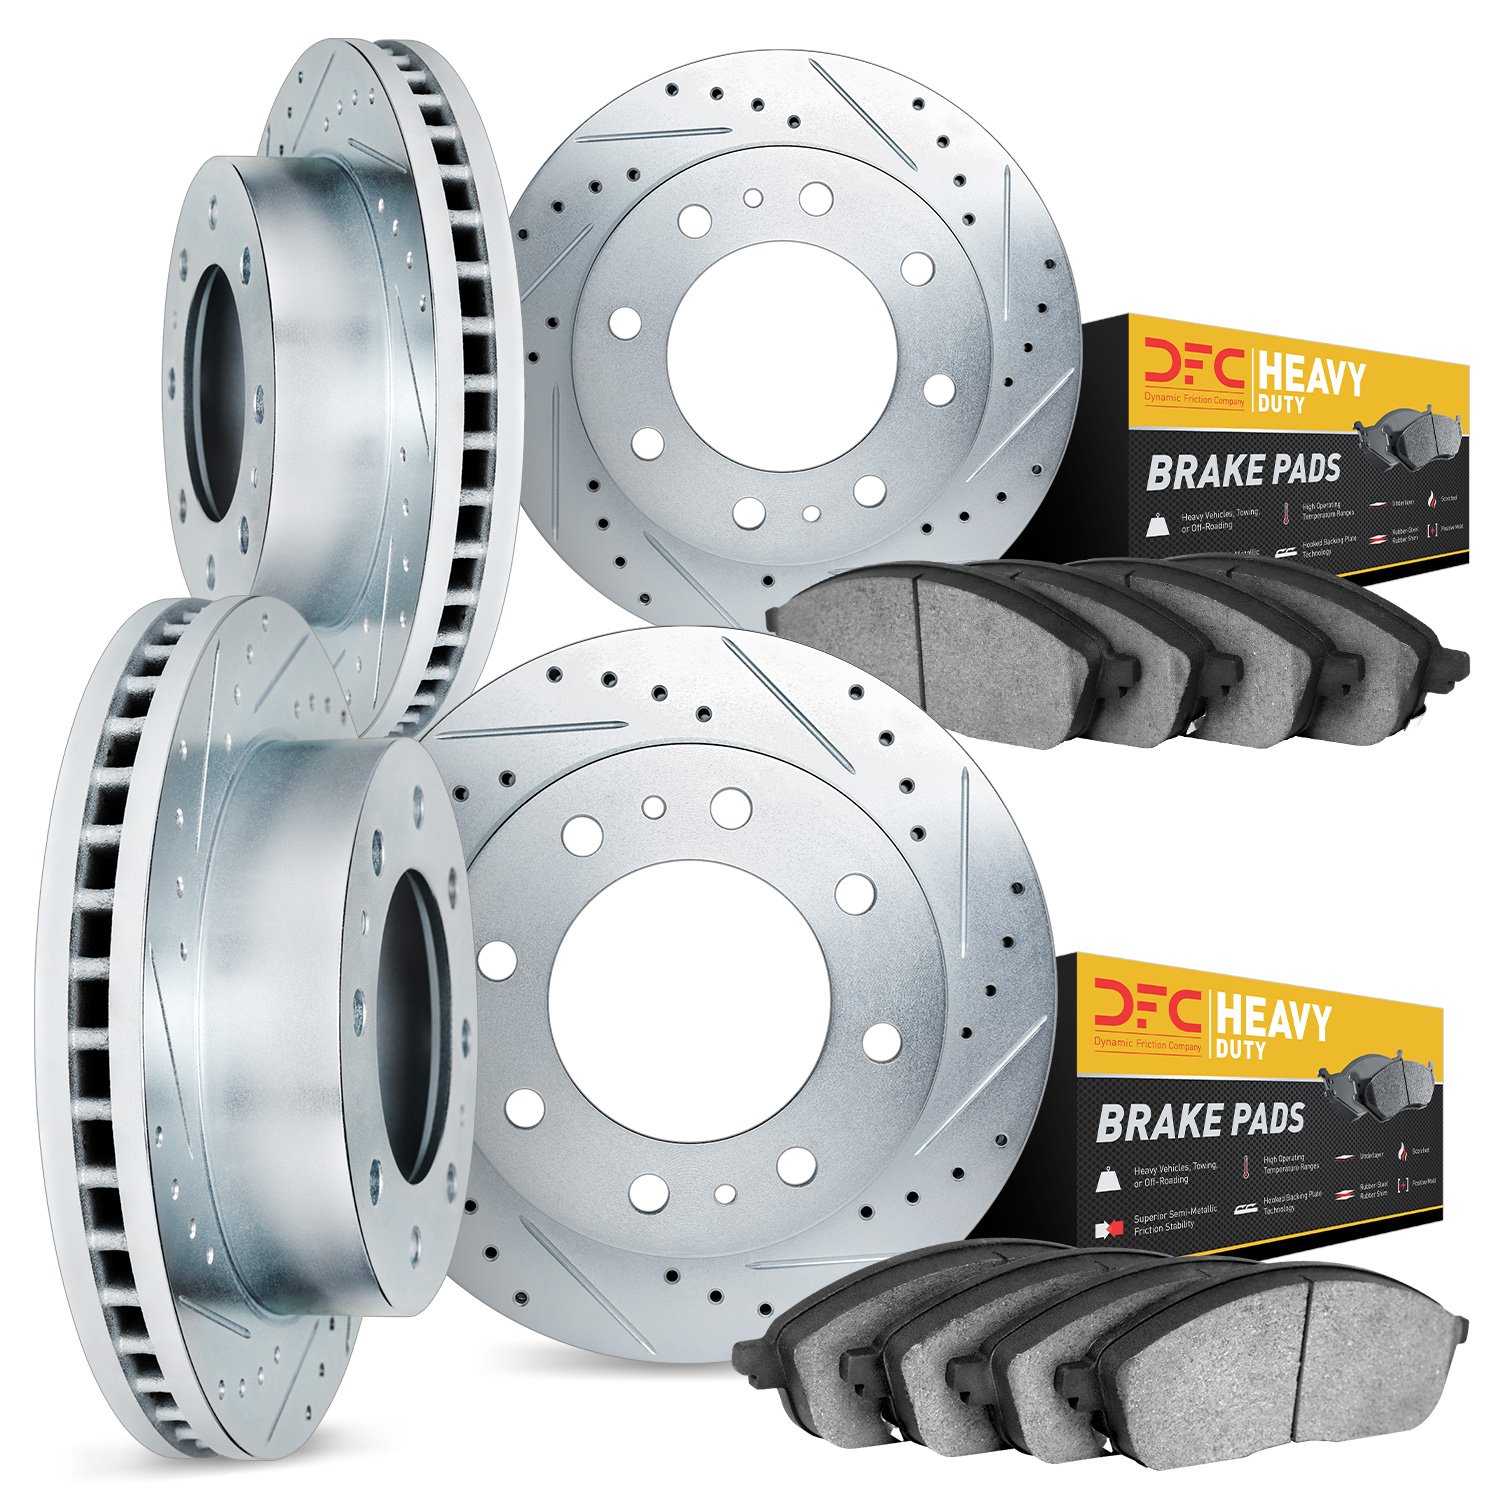 7204-48151 Drilled/Slotted Rotors w/Heavy-Duty Brake Pads Kit [Silver], 2001-2010 GM, Position: Front and Rear